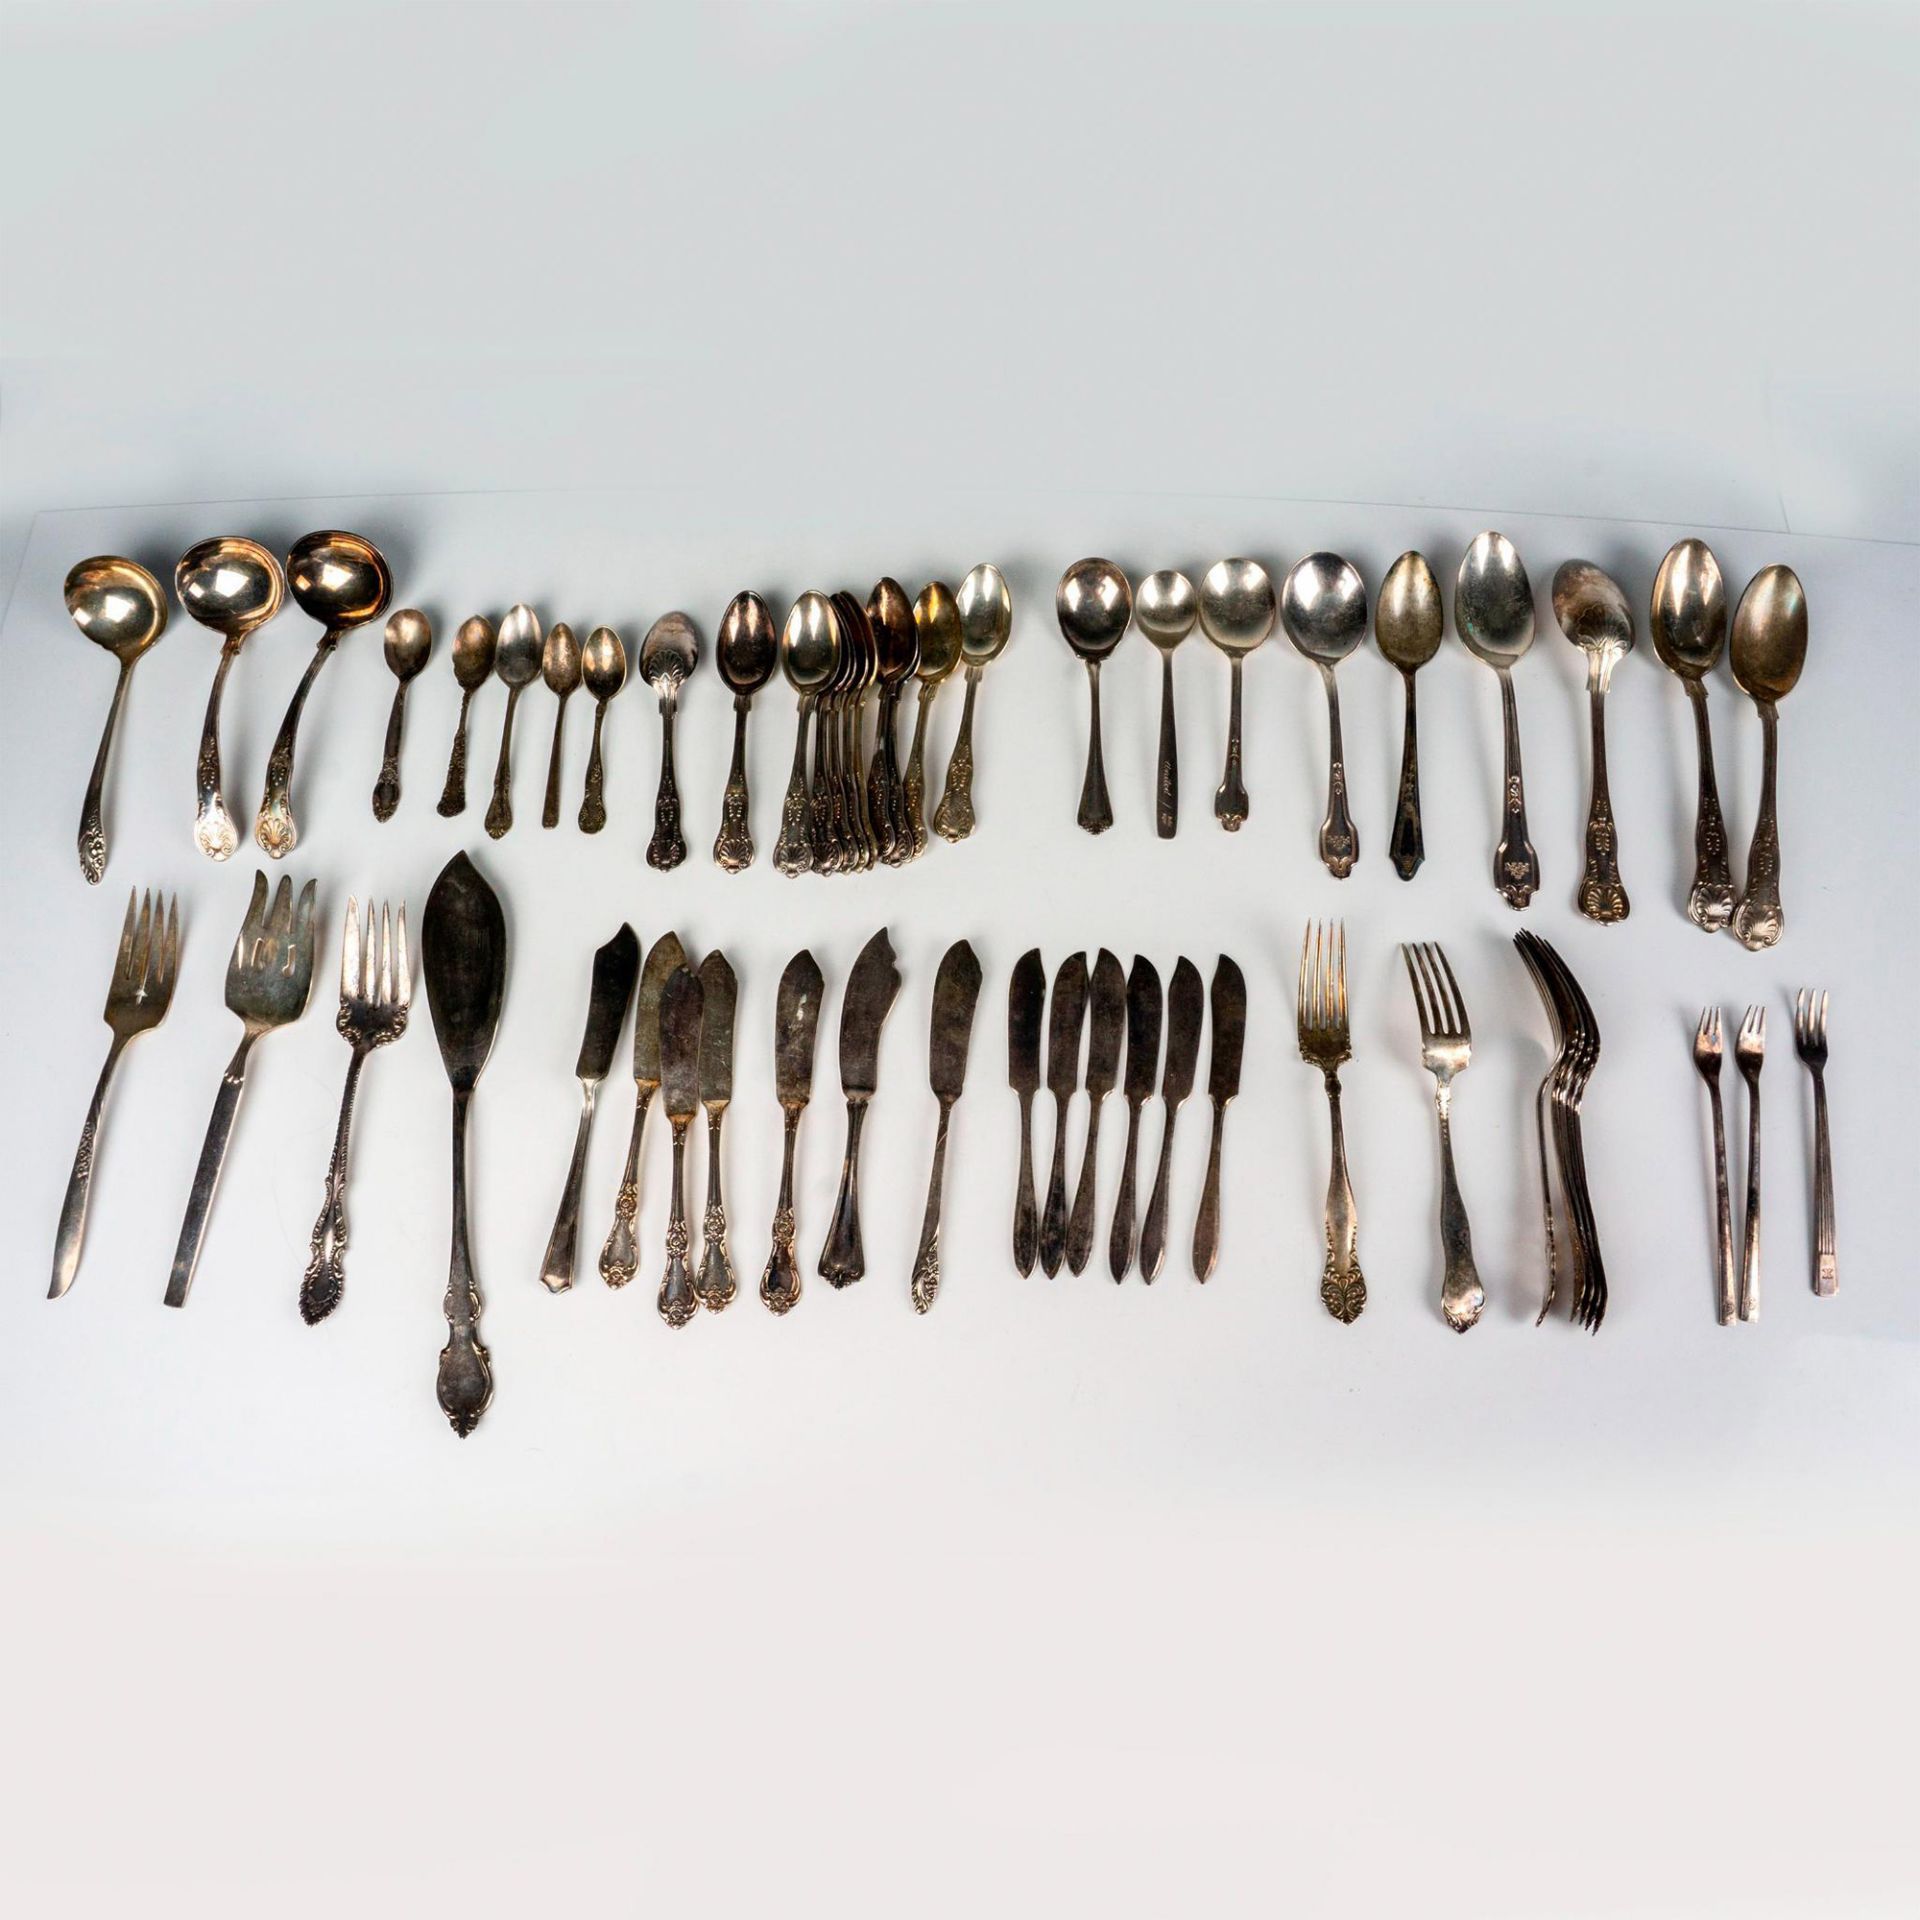 55pc Vintage Stainless Steel Flatware - Image 2 of 4